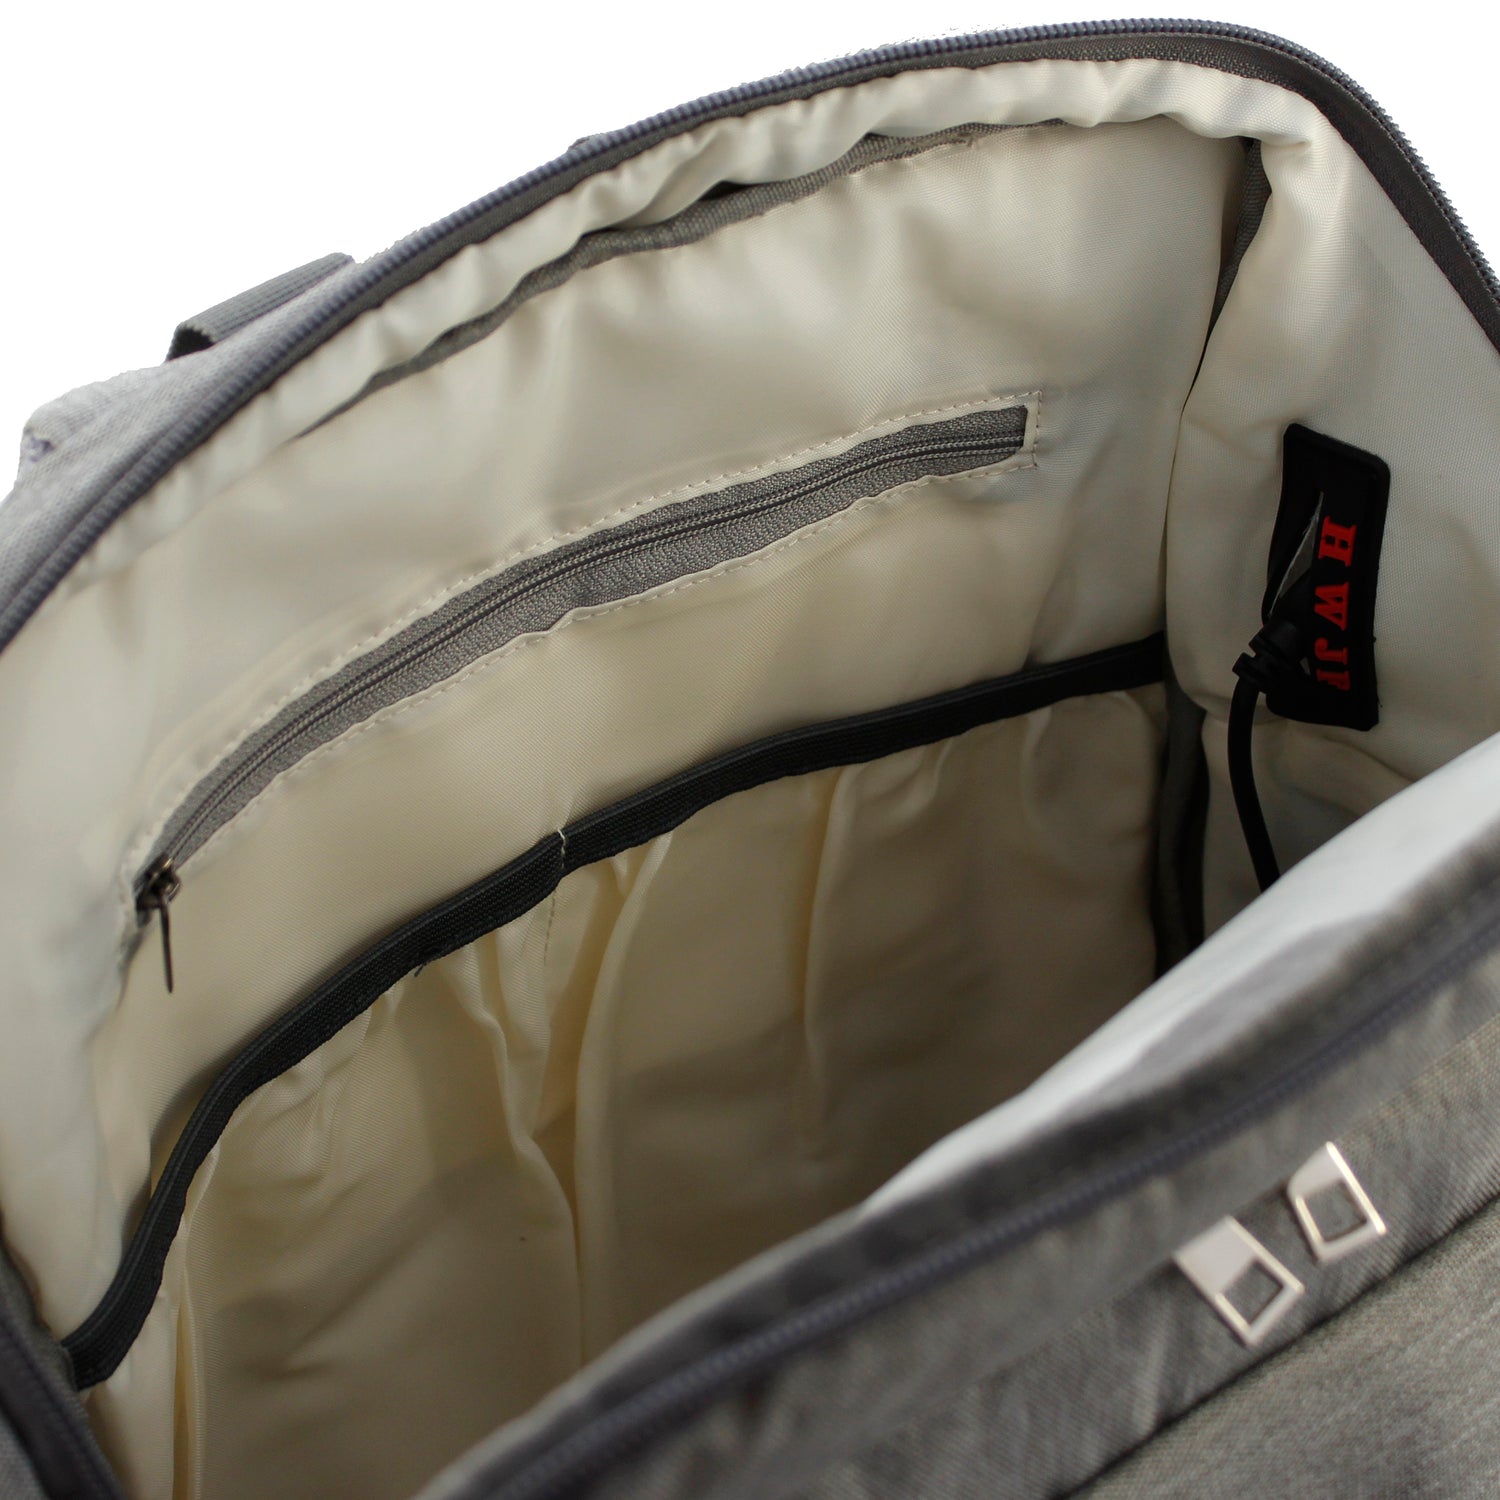 Grey Diaper Travel Backpack - Escape Society